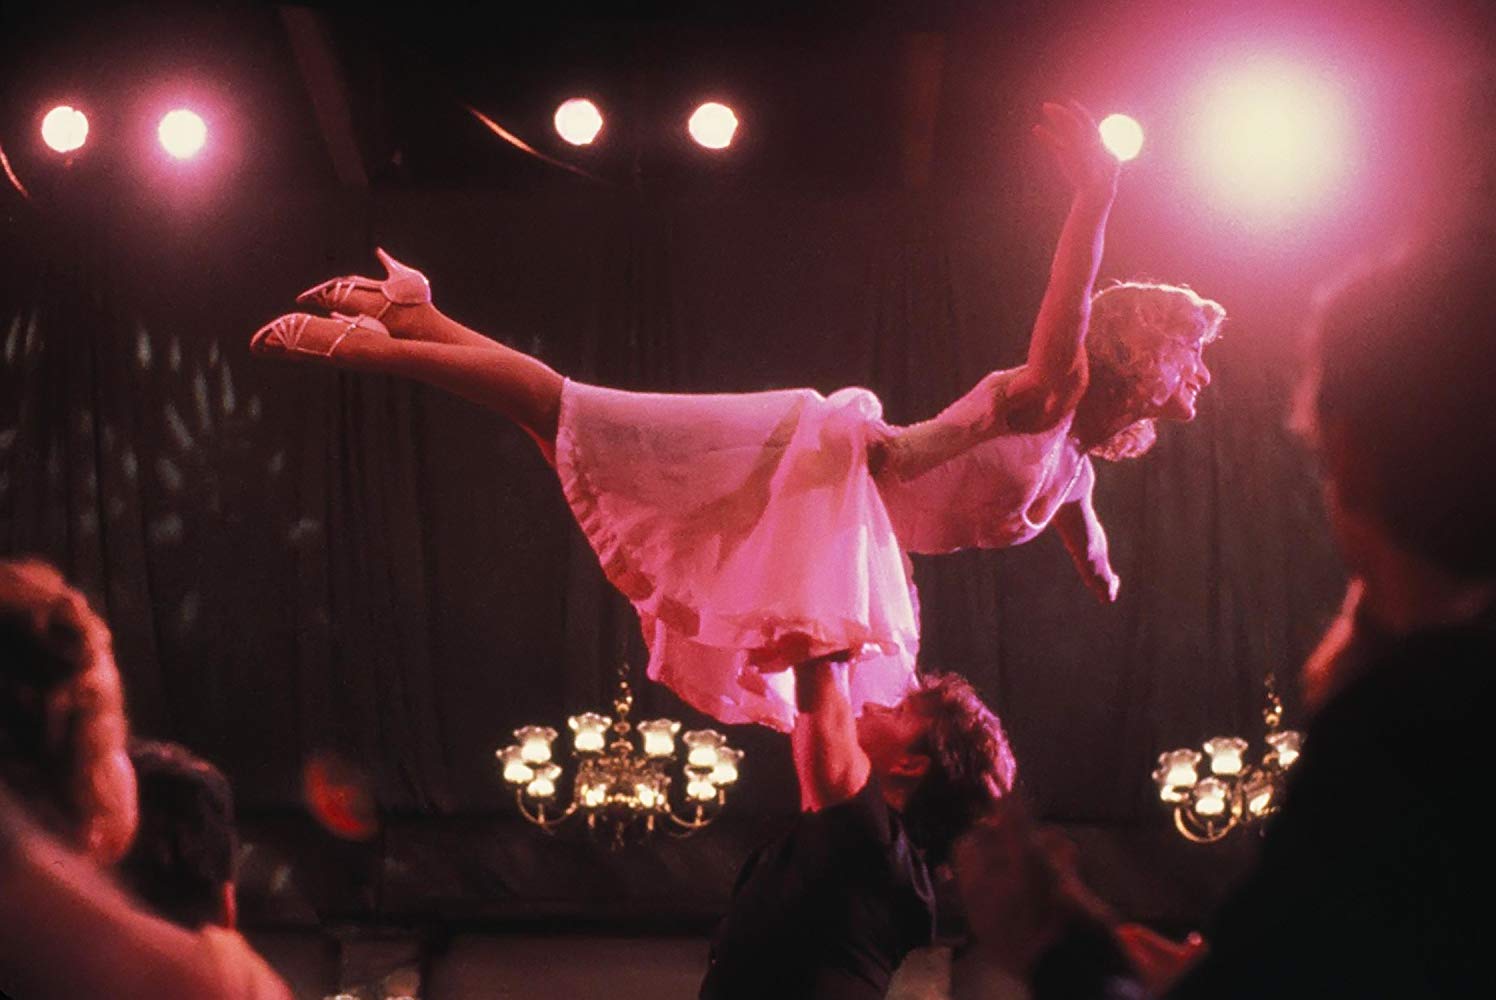 The lift in Dirty Dancing is one of the most iconic scenes in cinema.